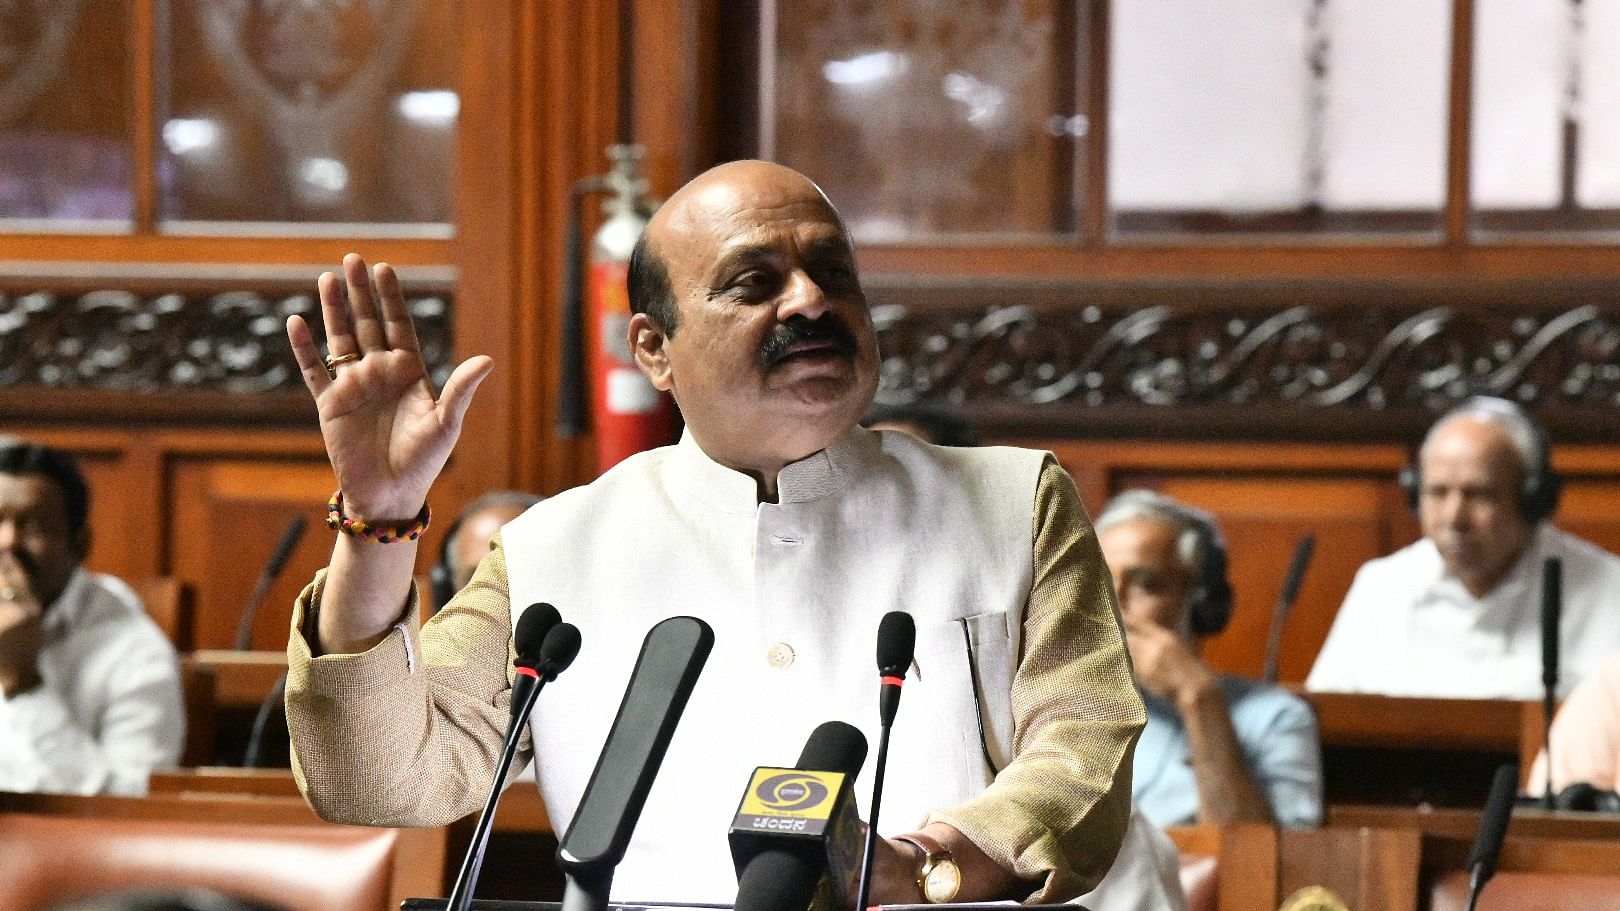 <div class="paragraphs"><p>Karnataka Chief Minister Basavaraj Bommai's cabinet scrapped reservation for Muslims provided under 2B category and increased reservation for Pachamasali Lingayats and Vokkaligas under 2D and 2C categories of the Backward Classes list.&nbsp;</p></div>